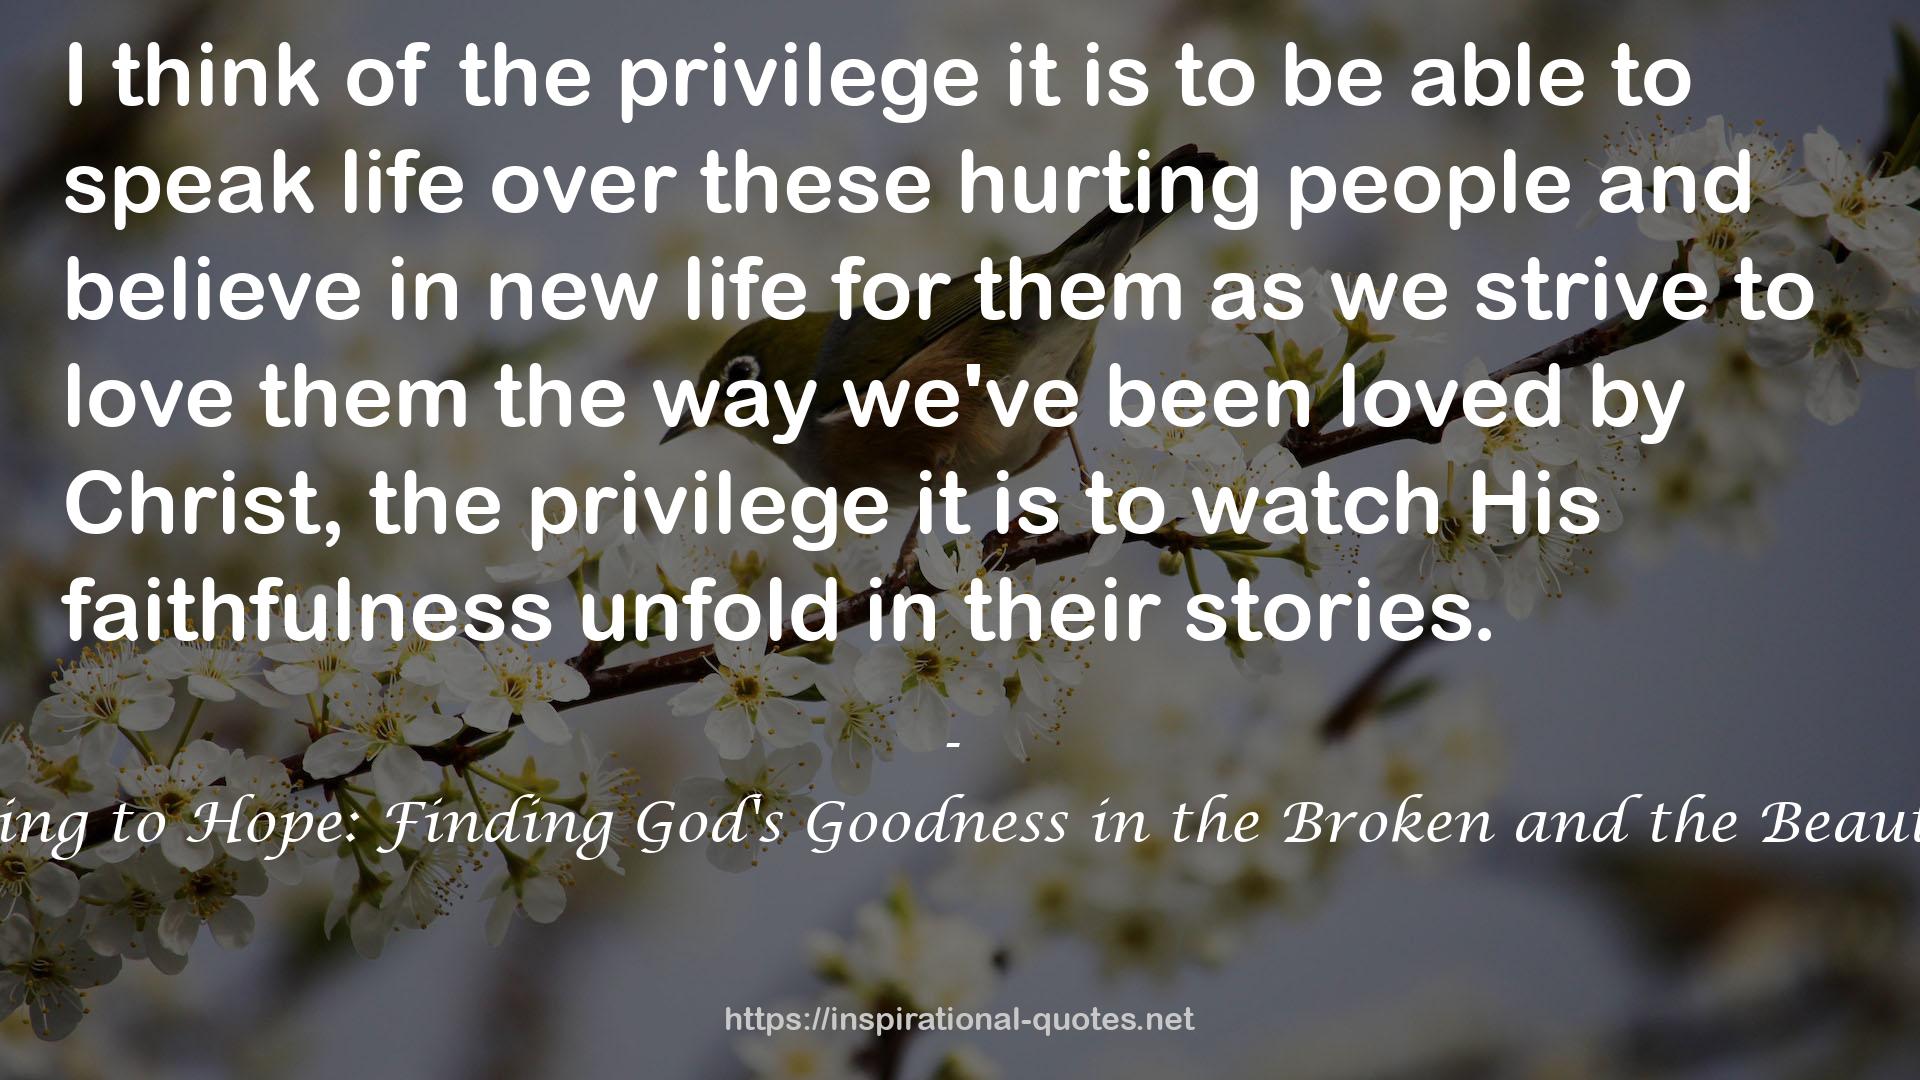 Daring to Hope: Finding God's Goodness in the Broken and the Beautiful QUOTES